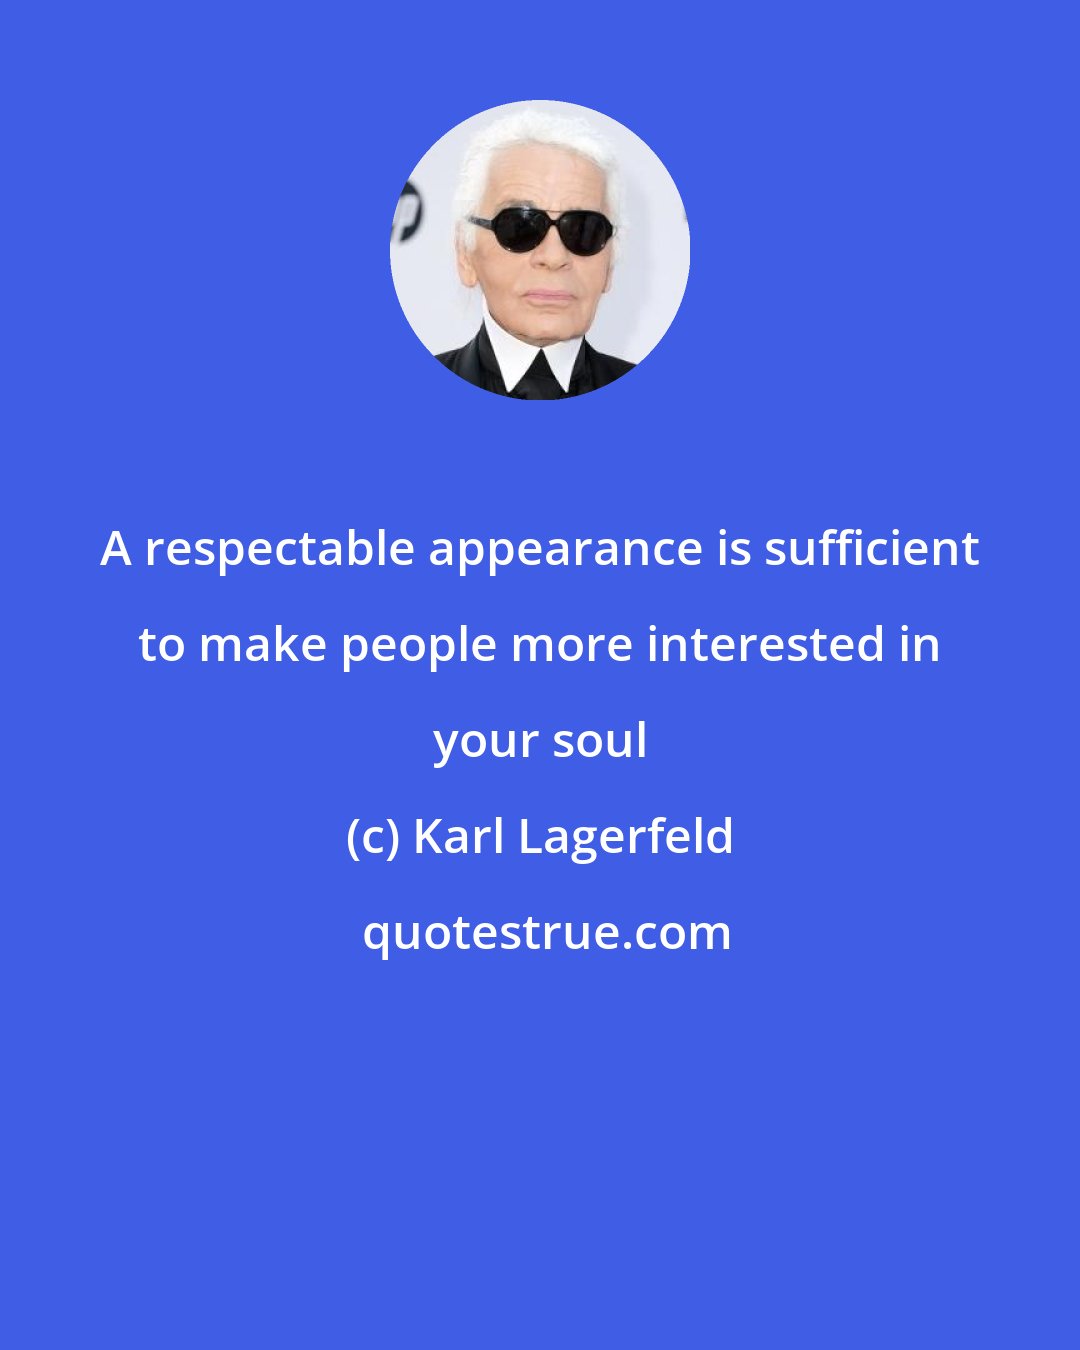 Karl Lagerfeld: A respectable appearance is sufficient to make people more interested in your soul